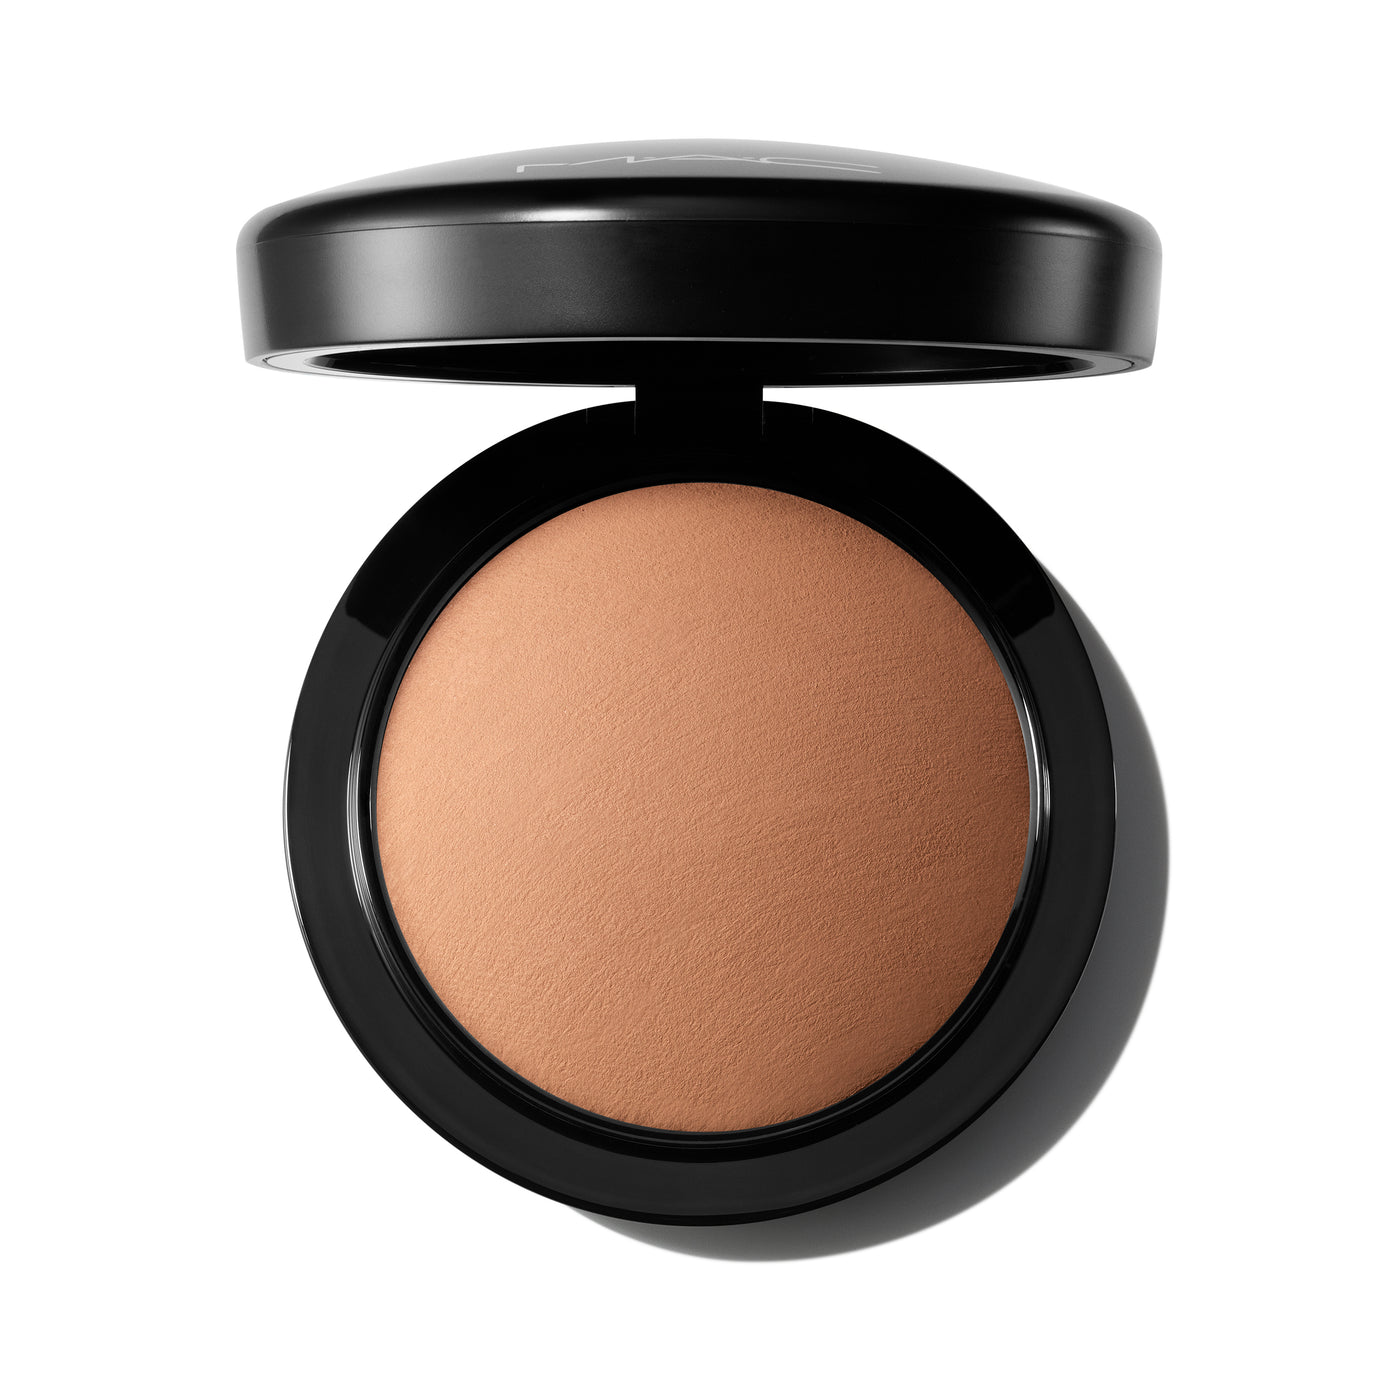 Shop The Latest Collection Of Mâ·Aâ·C Mineralize Skinfinish Natural In Lebanon